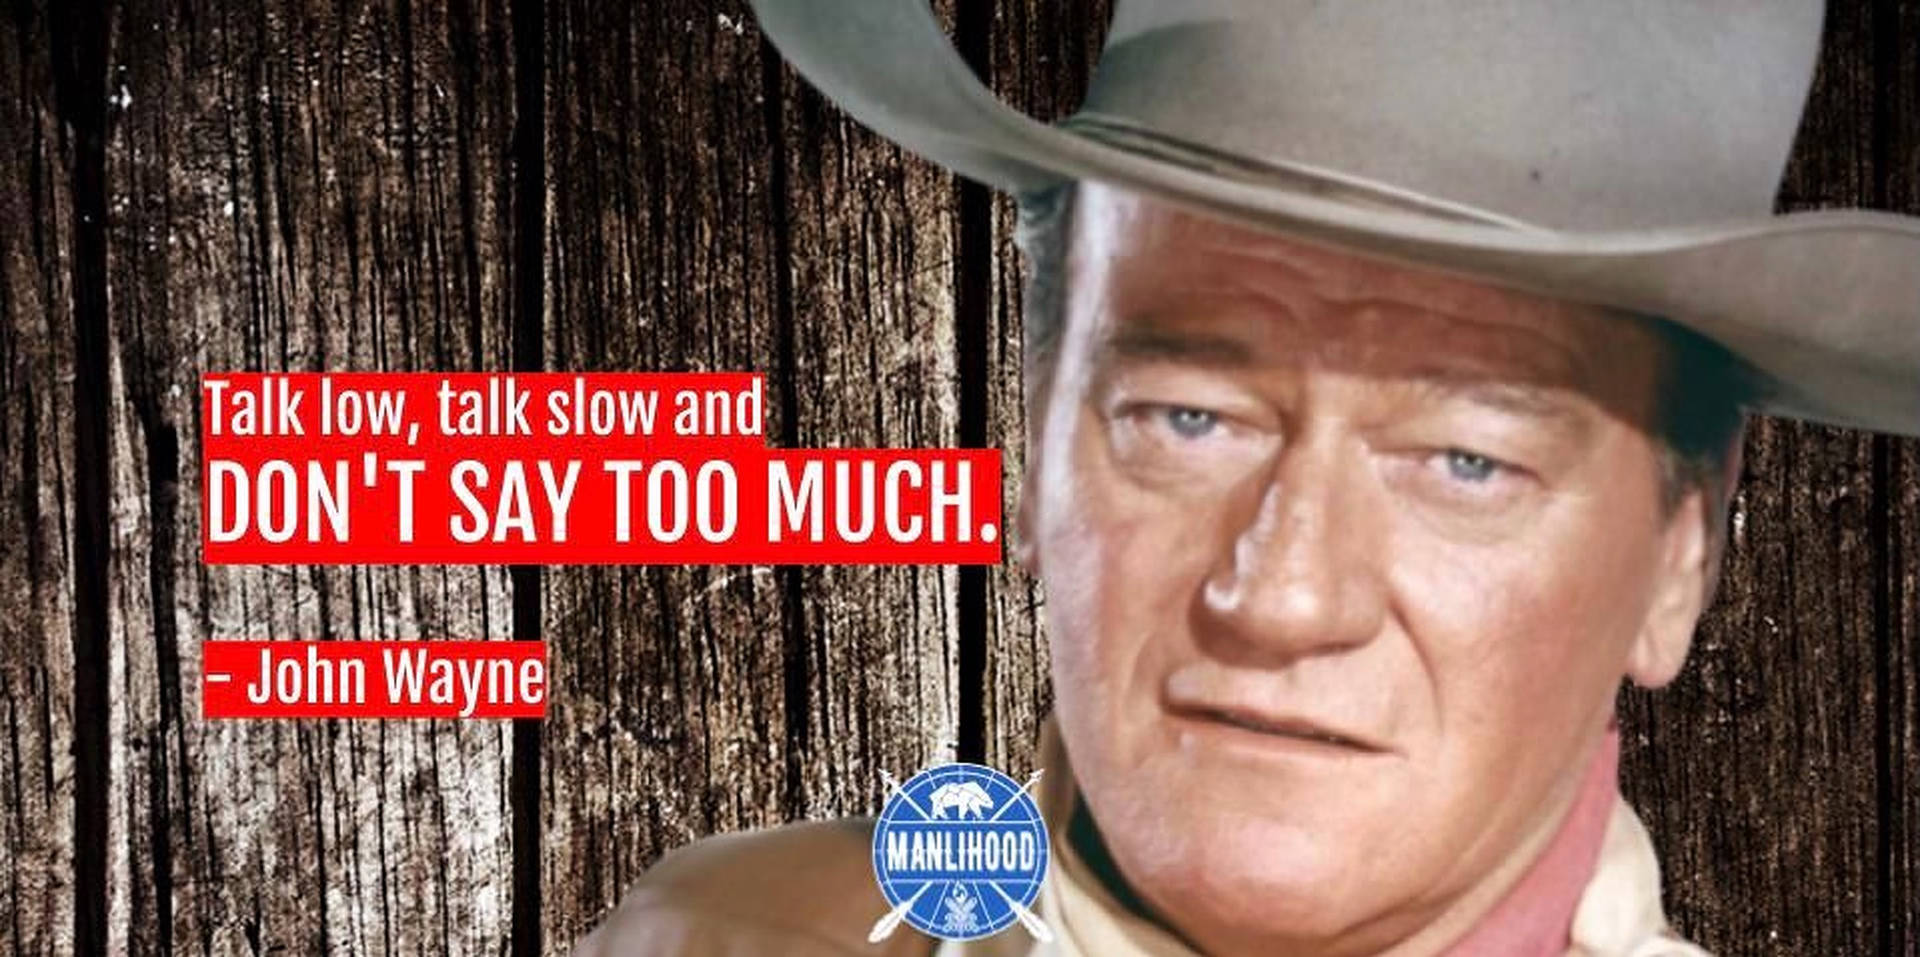 Quote By John Wayne Background